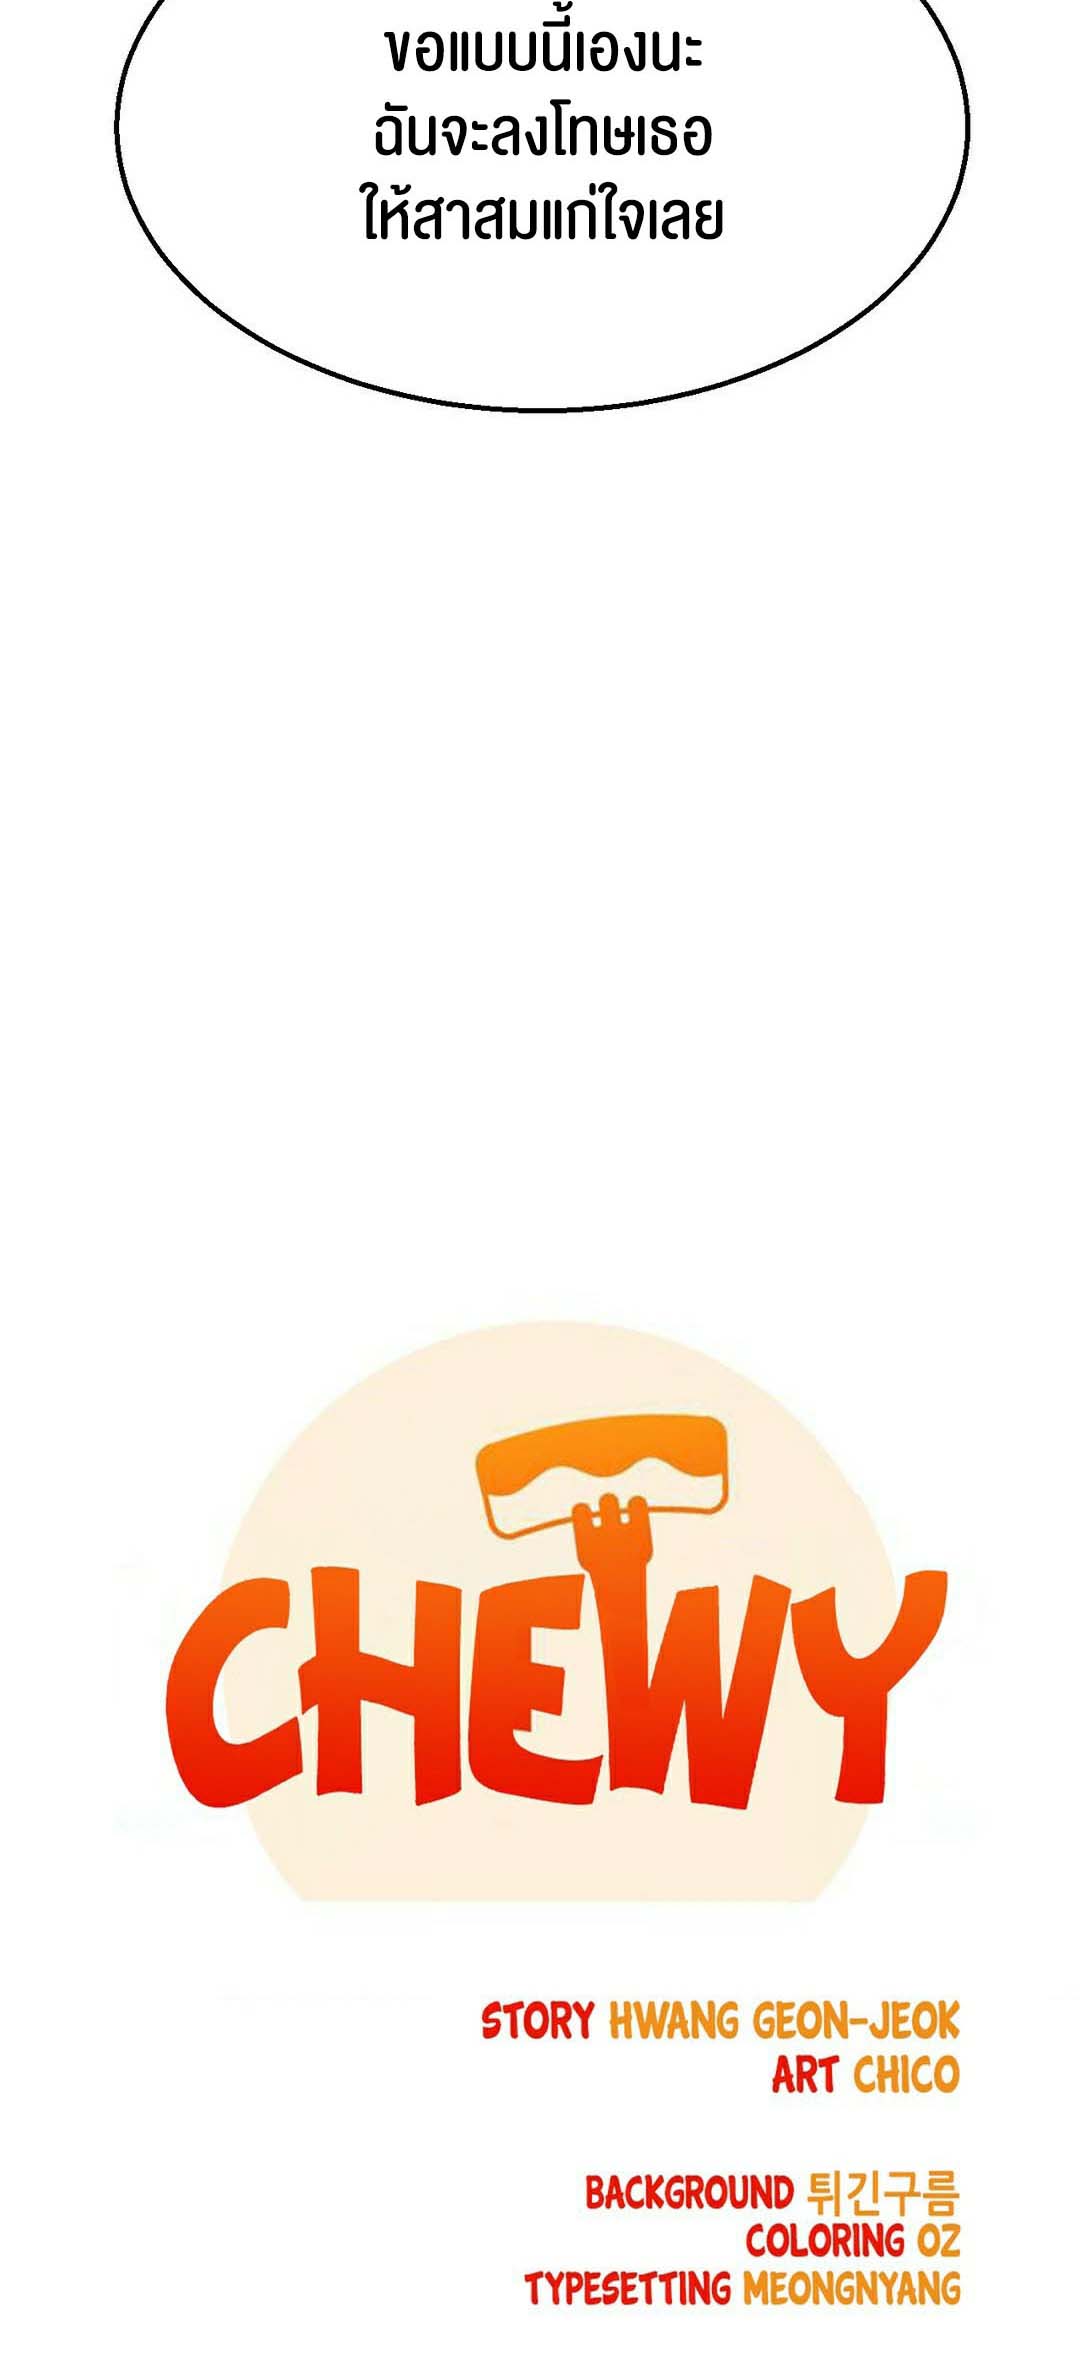 Chewy 14 08